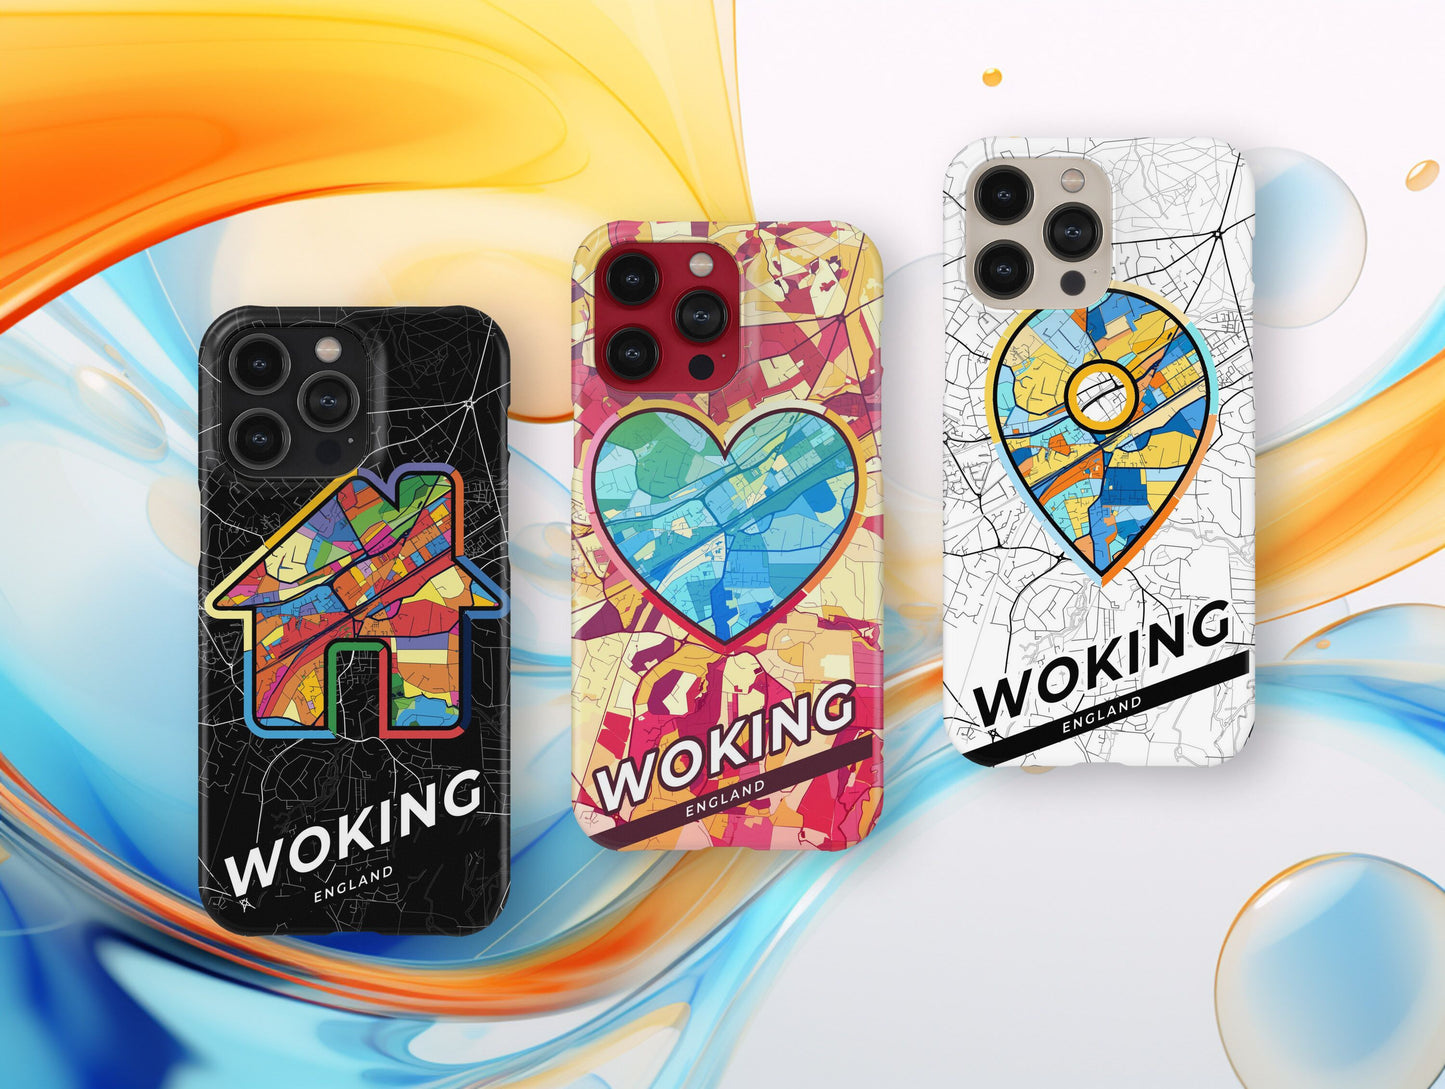 Woking England slim phone case with colorful icon